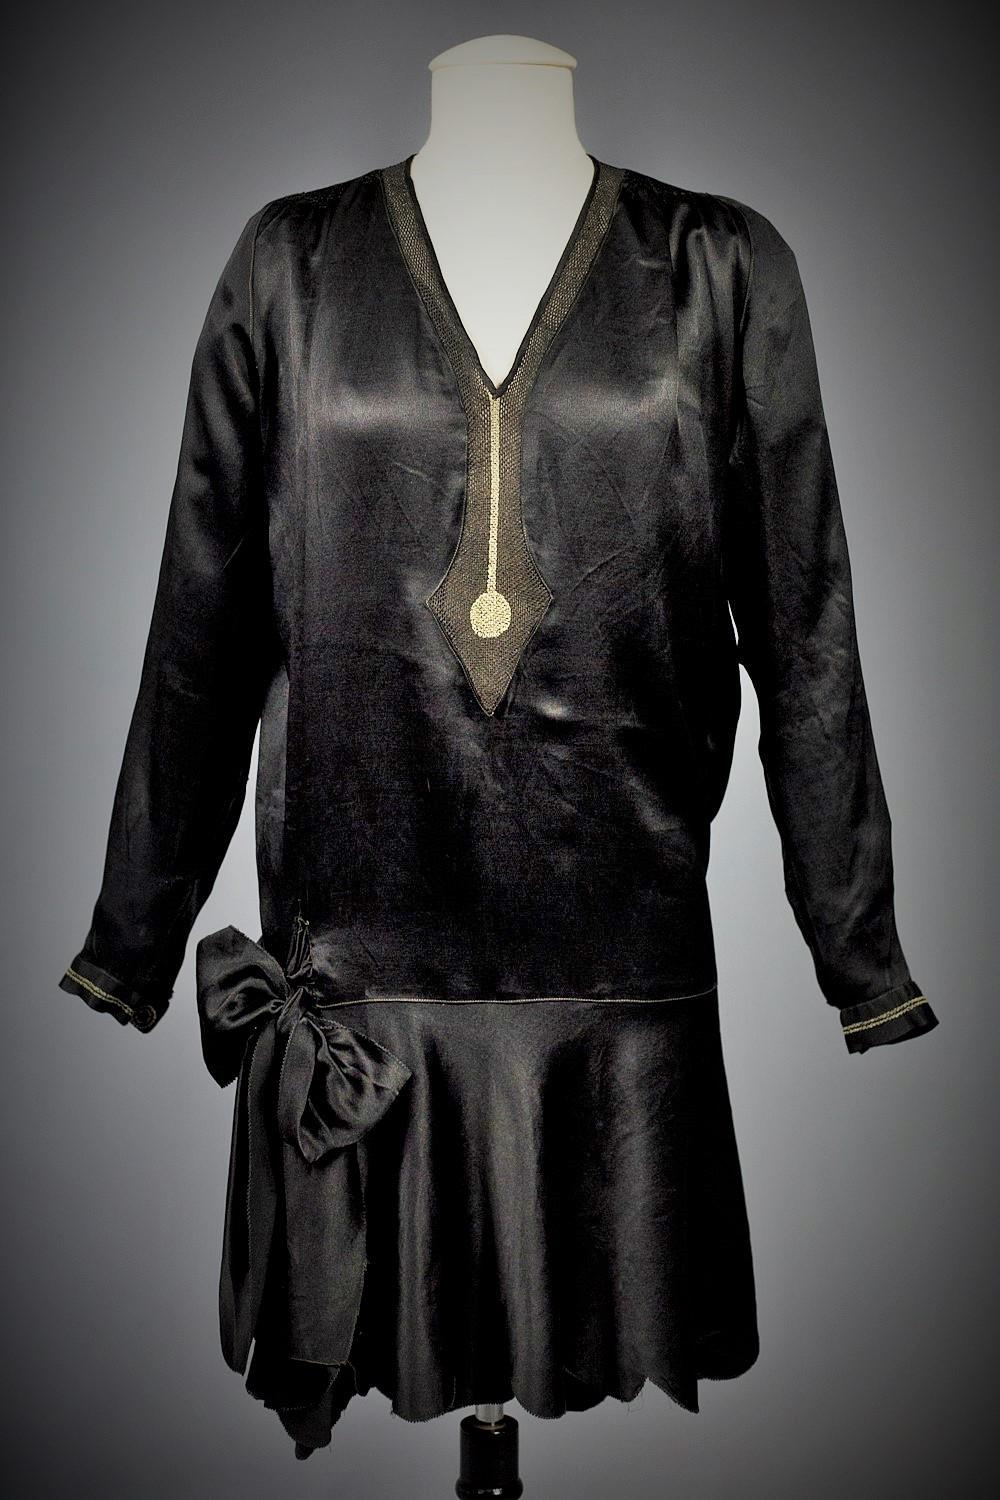 Circa 1920

France

Amazing little black dress, probably Haute Couture, with a minimalist graphic representing a drop of water and dating from the 1920s. Straight bag dress, V-neck, long sleeves in black Duchesse satin with a waxed sheen. Short